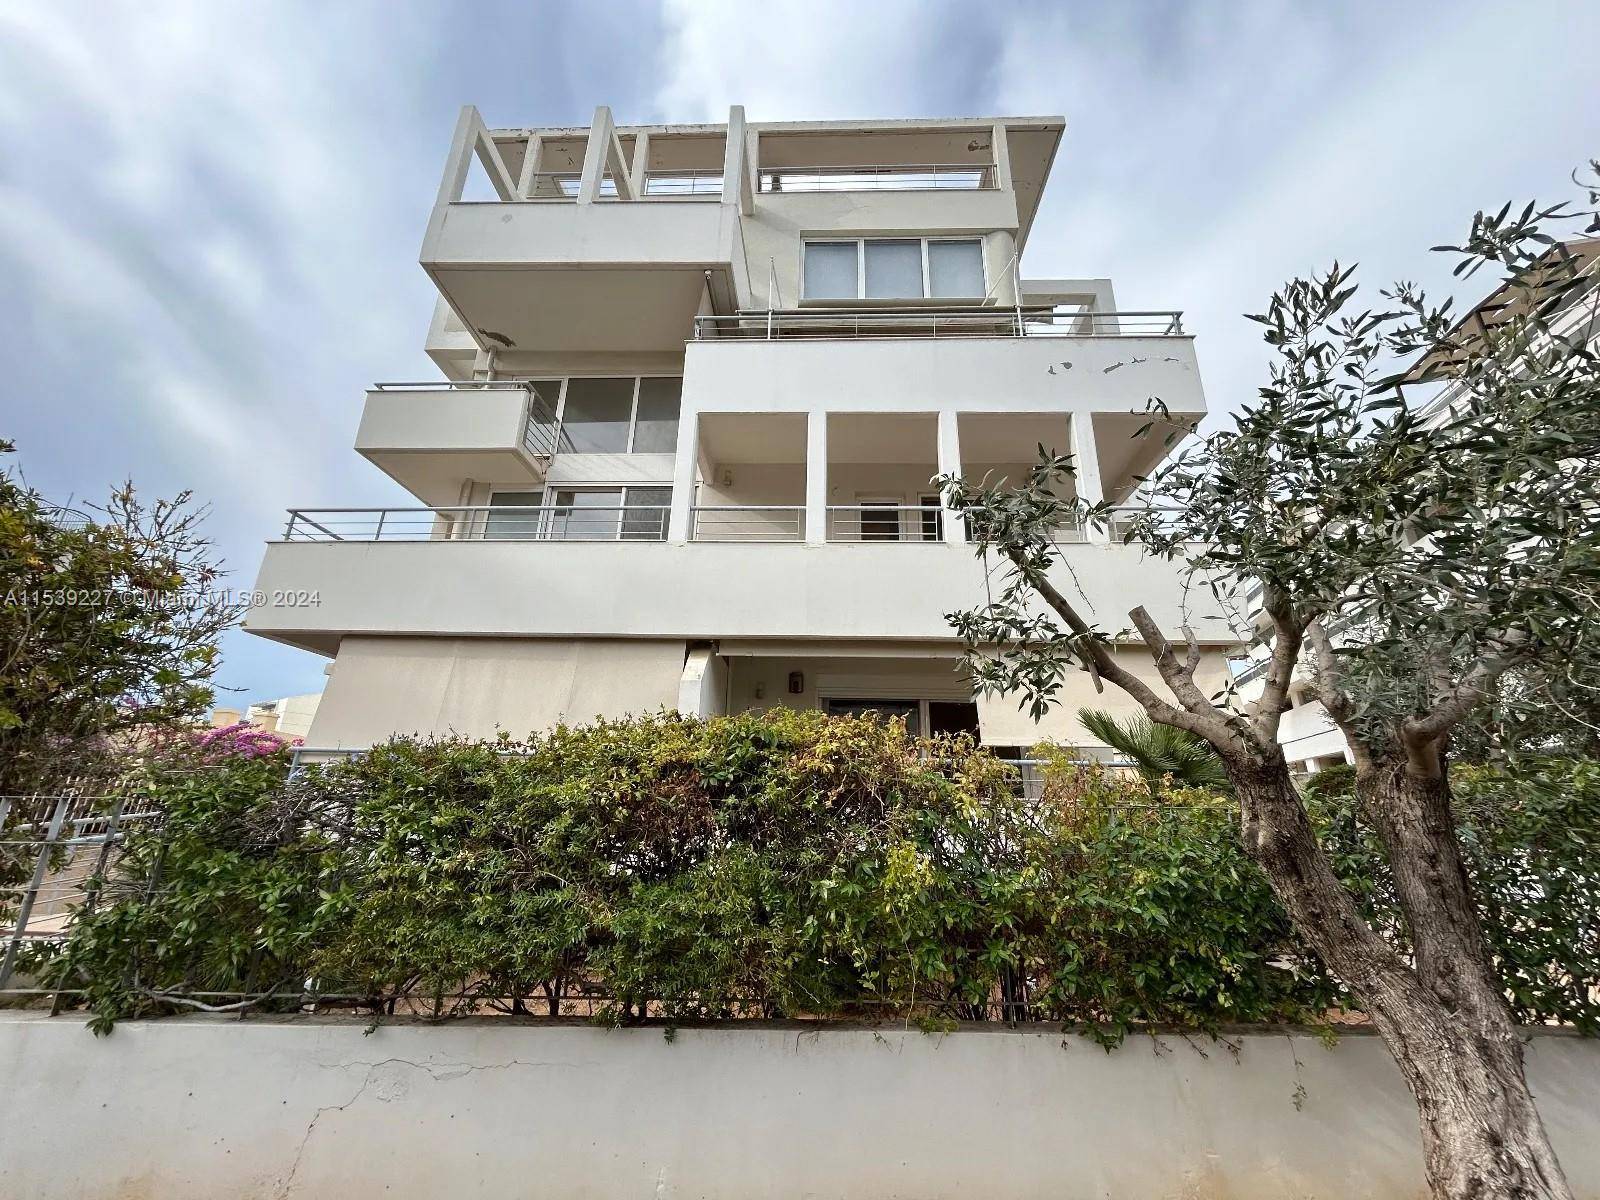 The property is located in Athens Greece in a very upscale neighborhood Glifade approximately 1800 meters from the seashore.